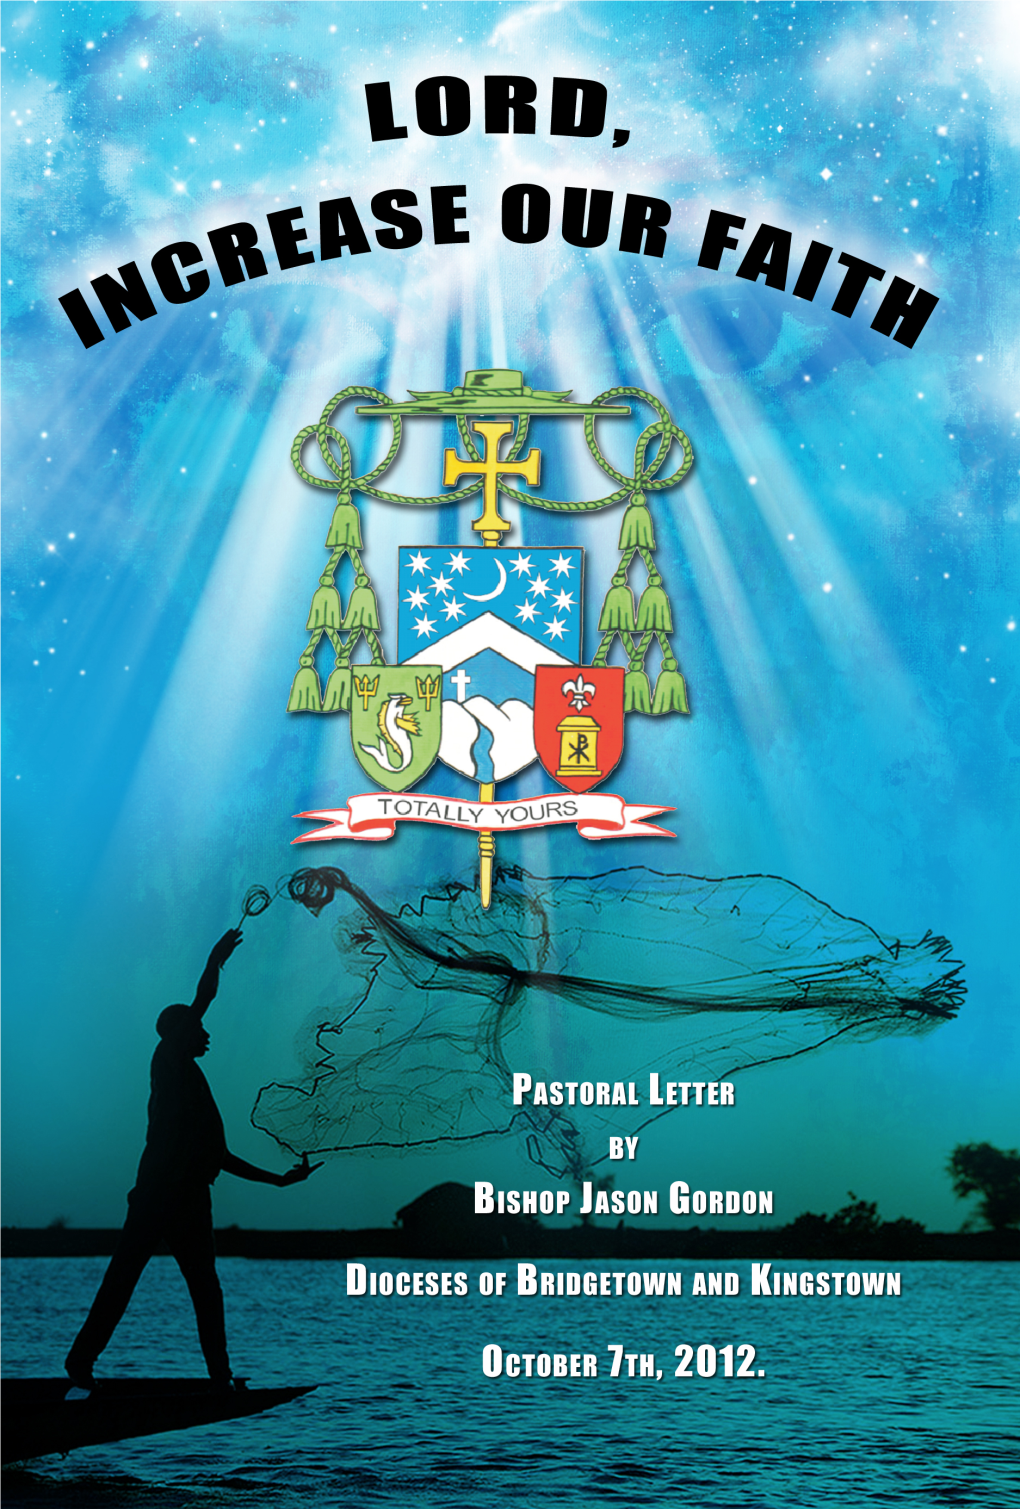 Bishop-LORD INCREASE OUR FAITH.Pdf